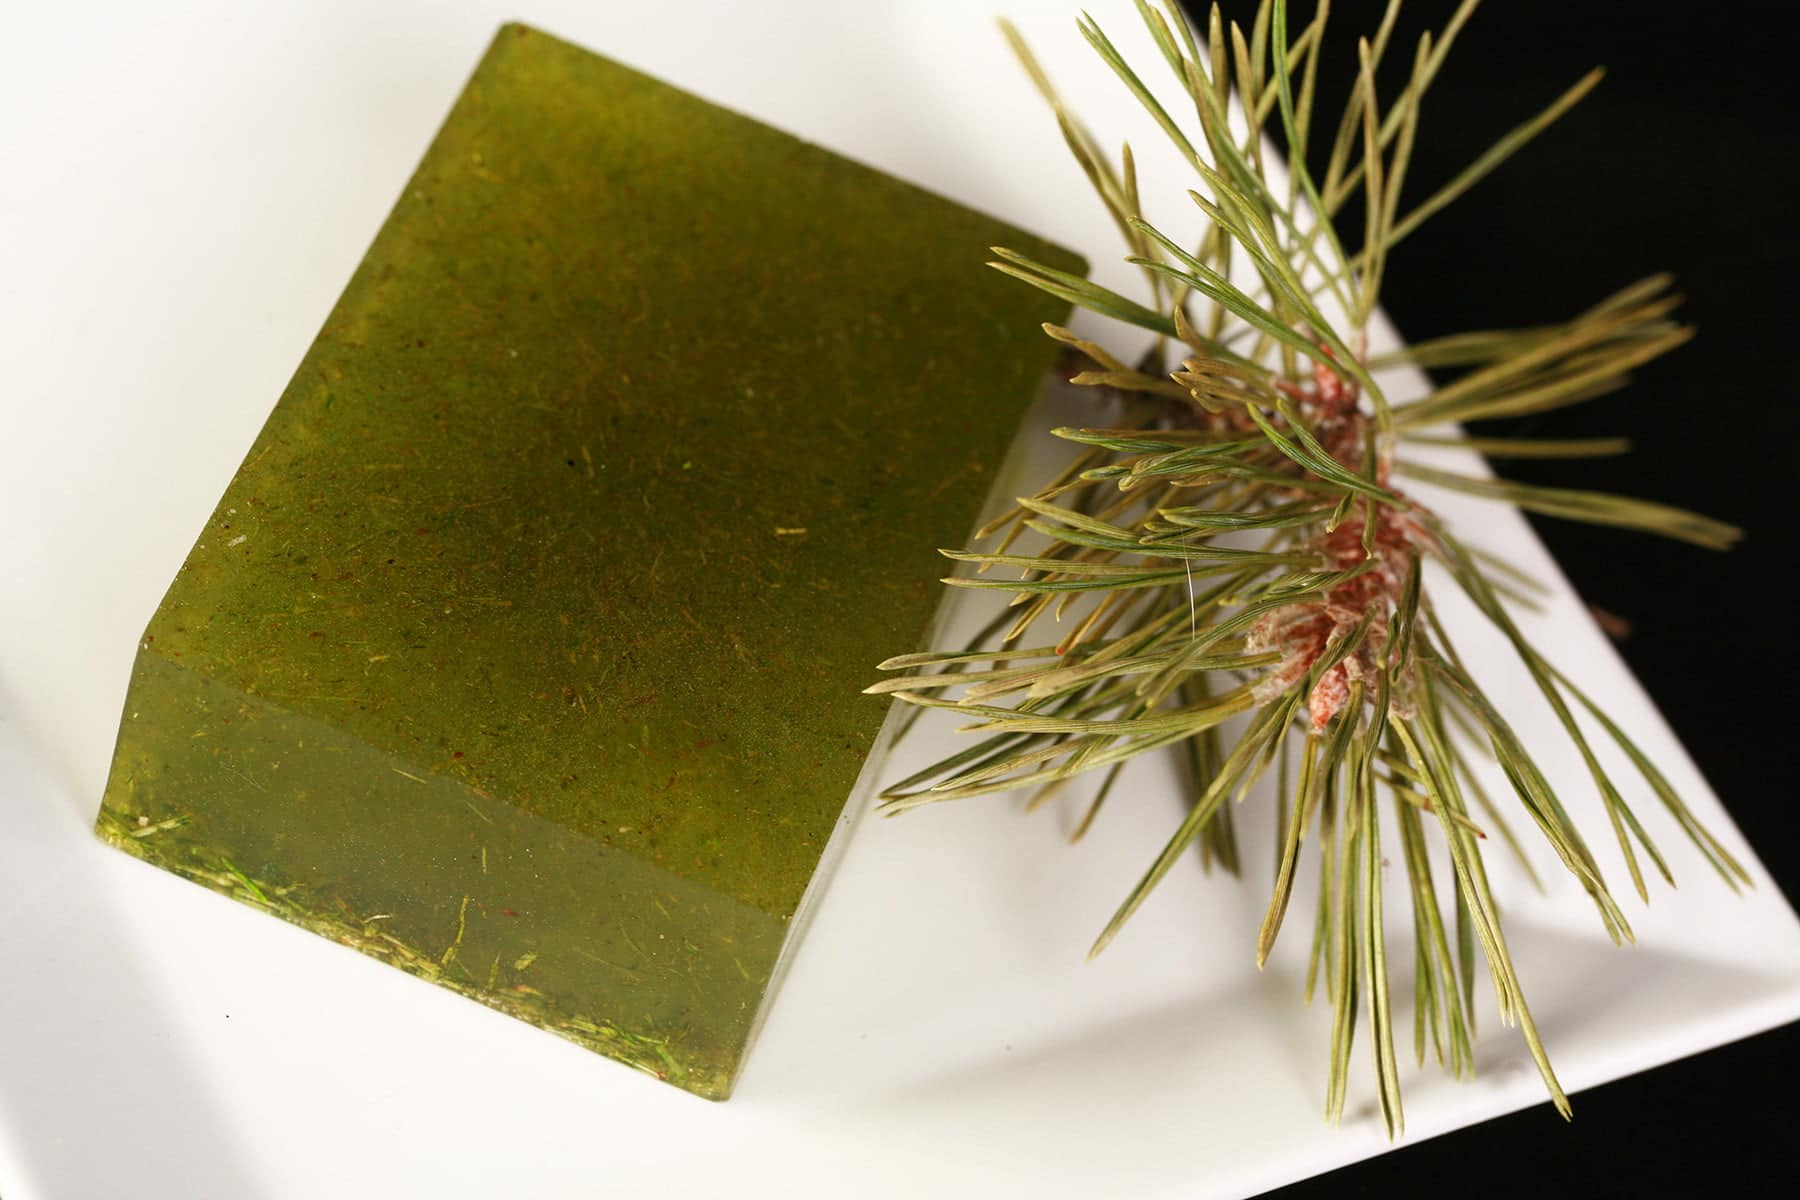 A green bar of soap, with green flecks of pine needles throughout.